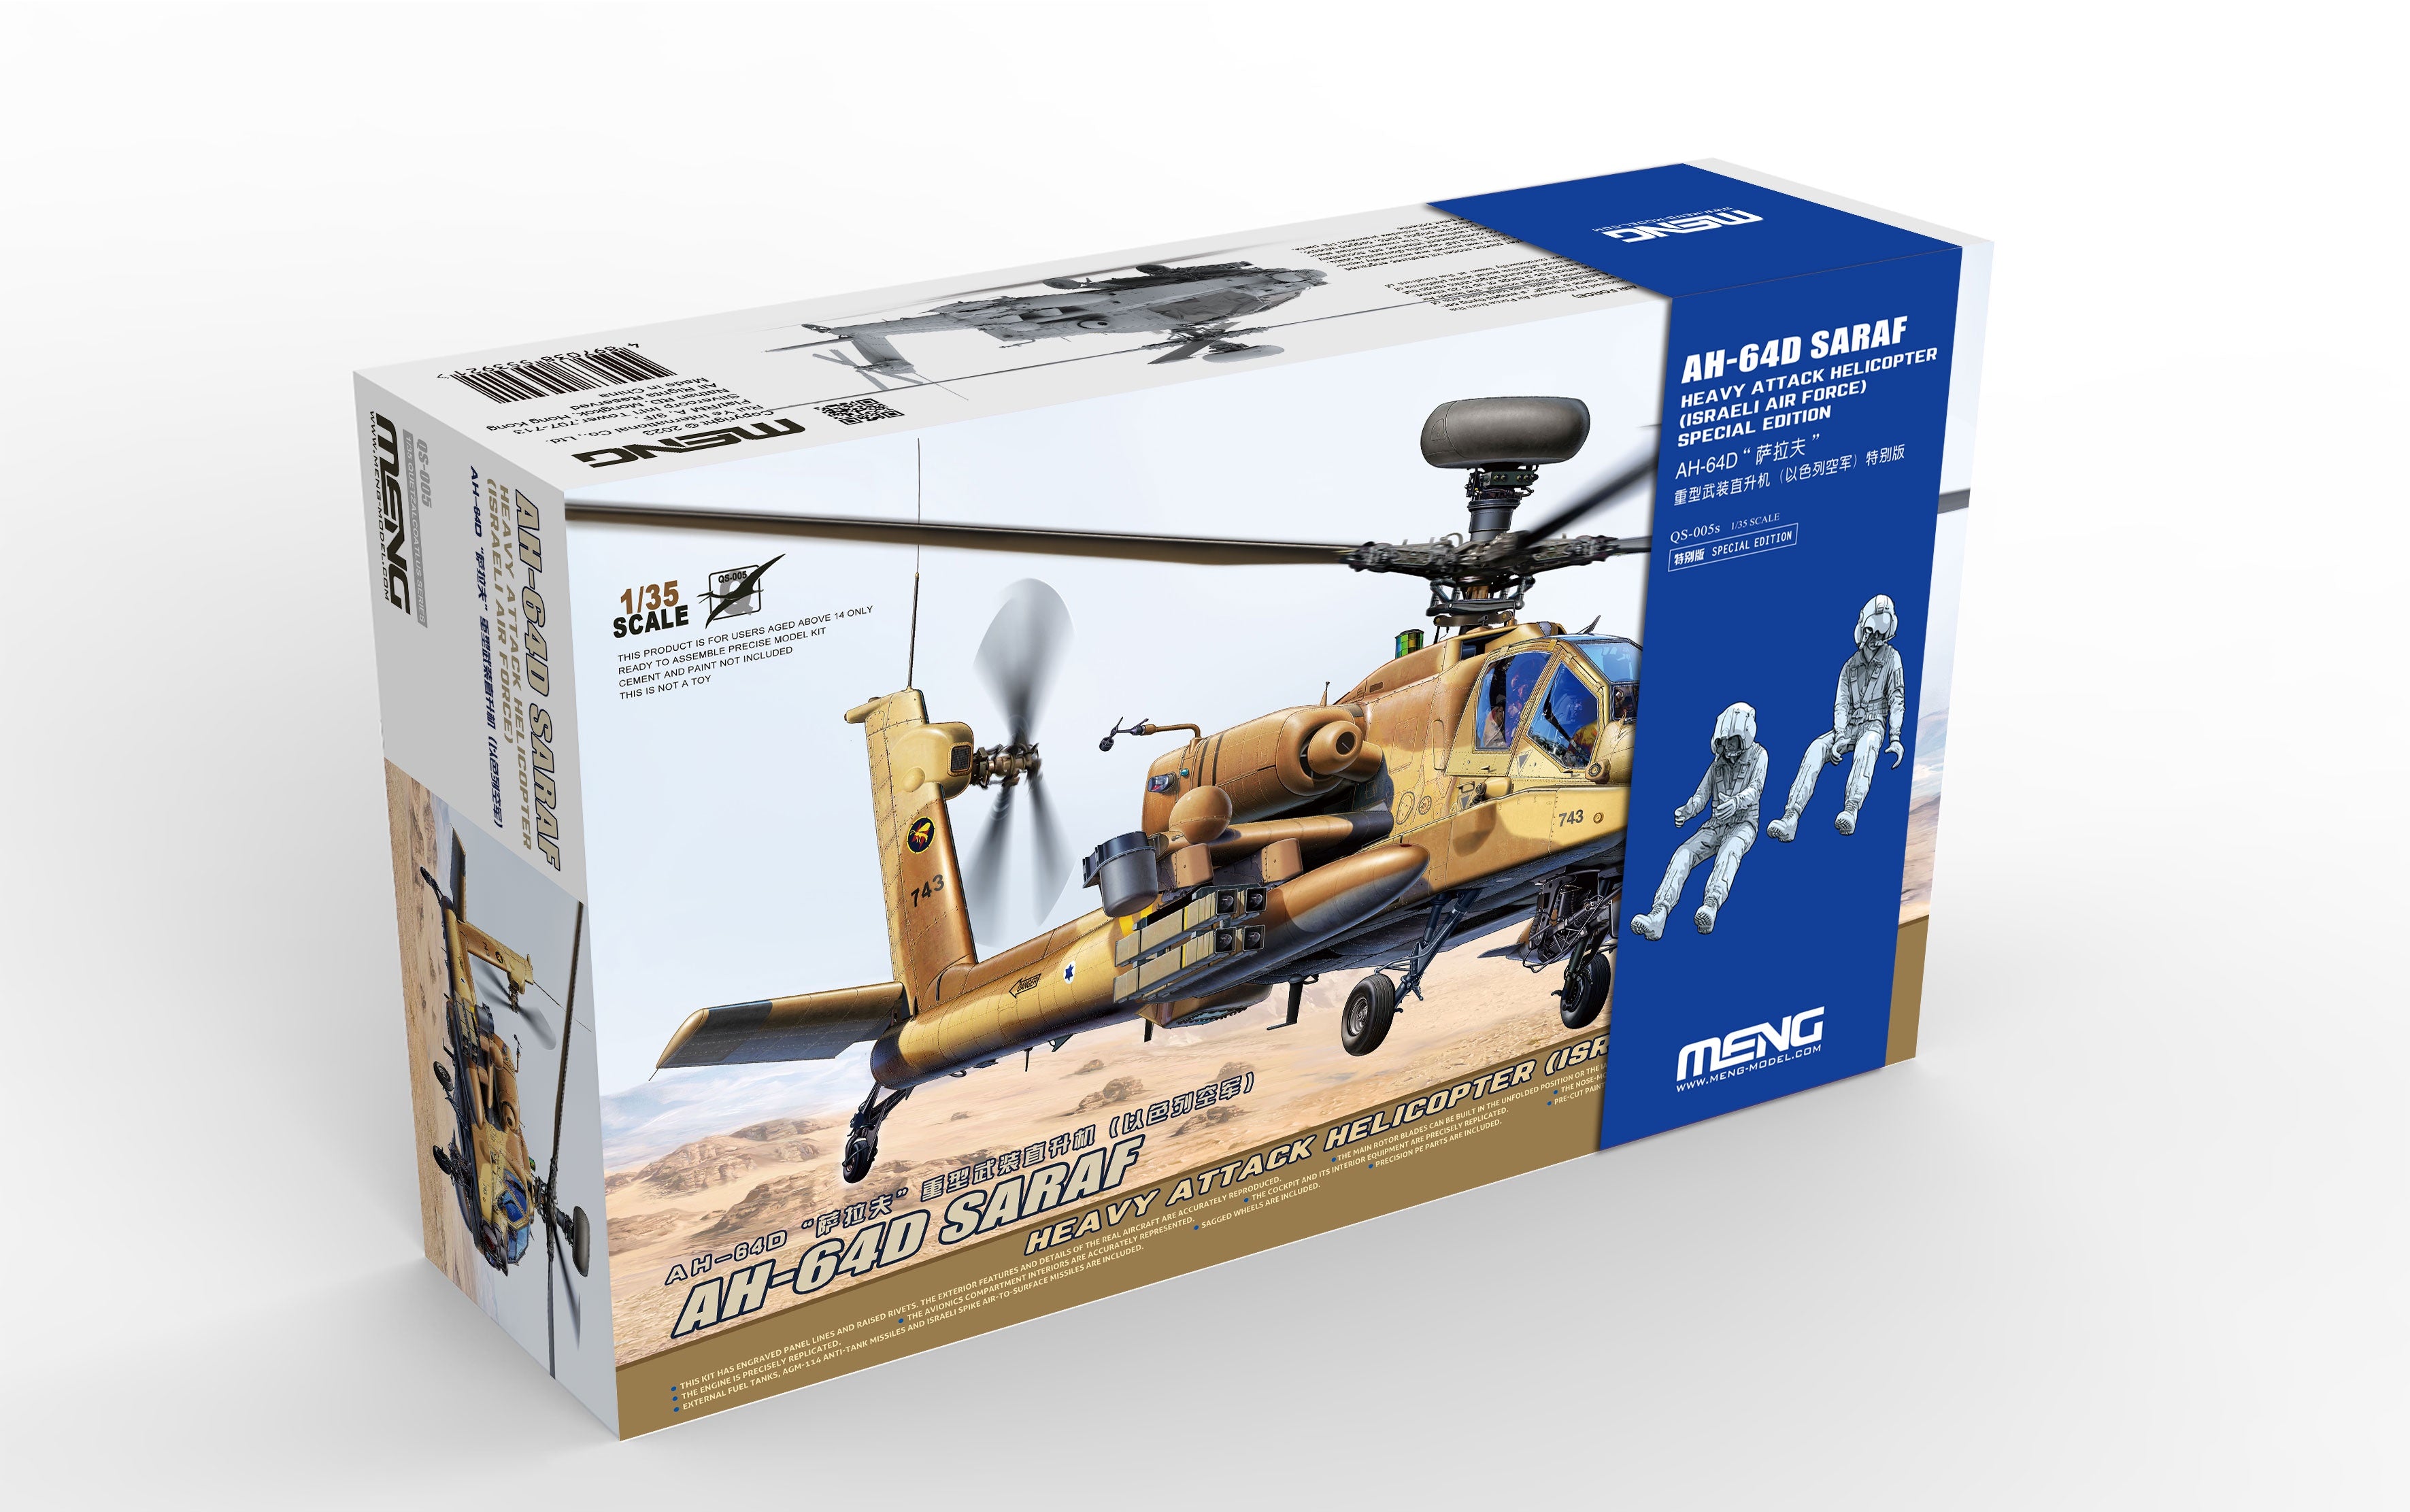 AH-64D Saraf Heavy Attack Helicopter (Israeli Air Force) Special Edition (incl. Two Resin figures) 1/35 #QS-005S by Meng